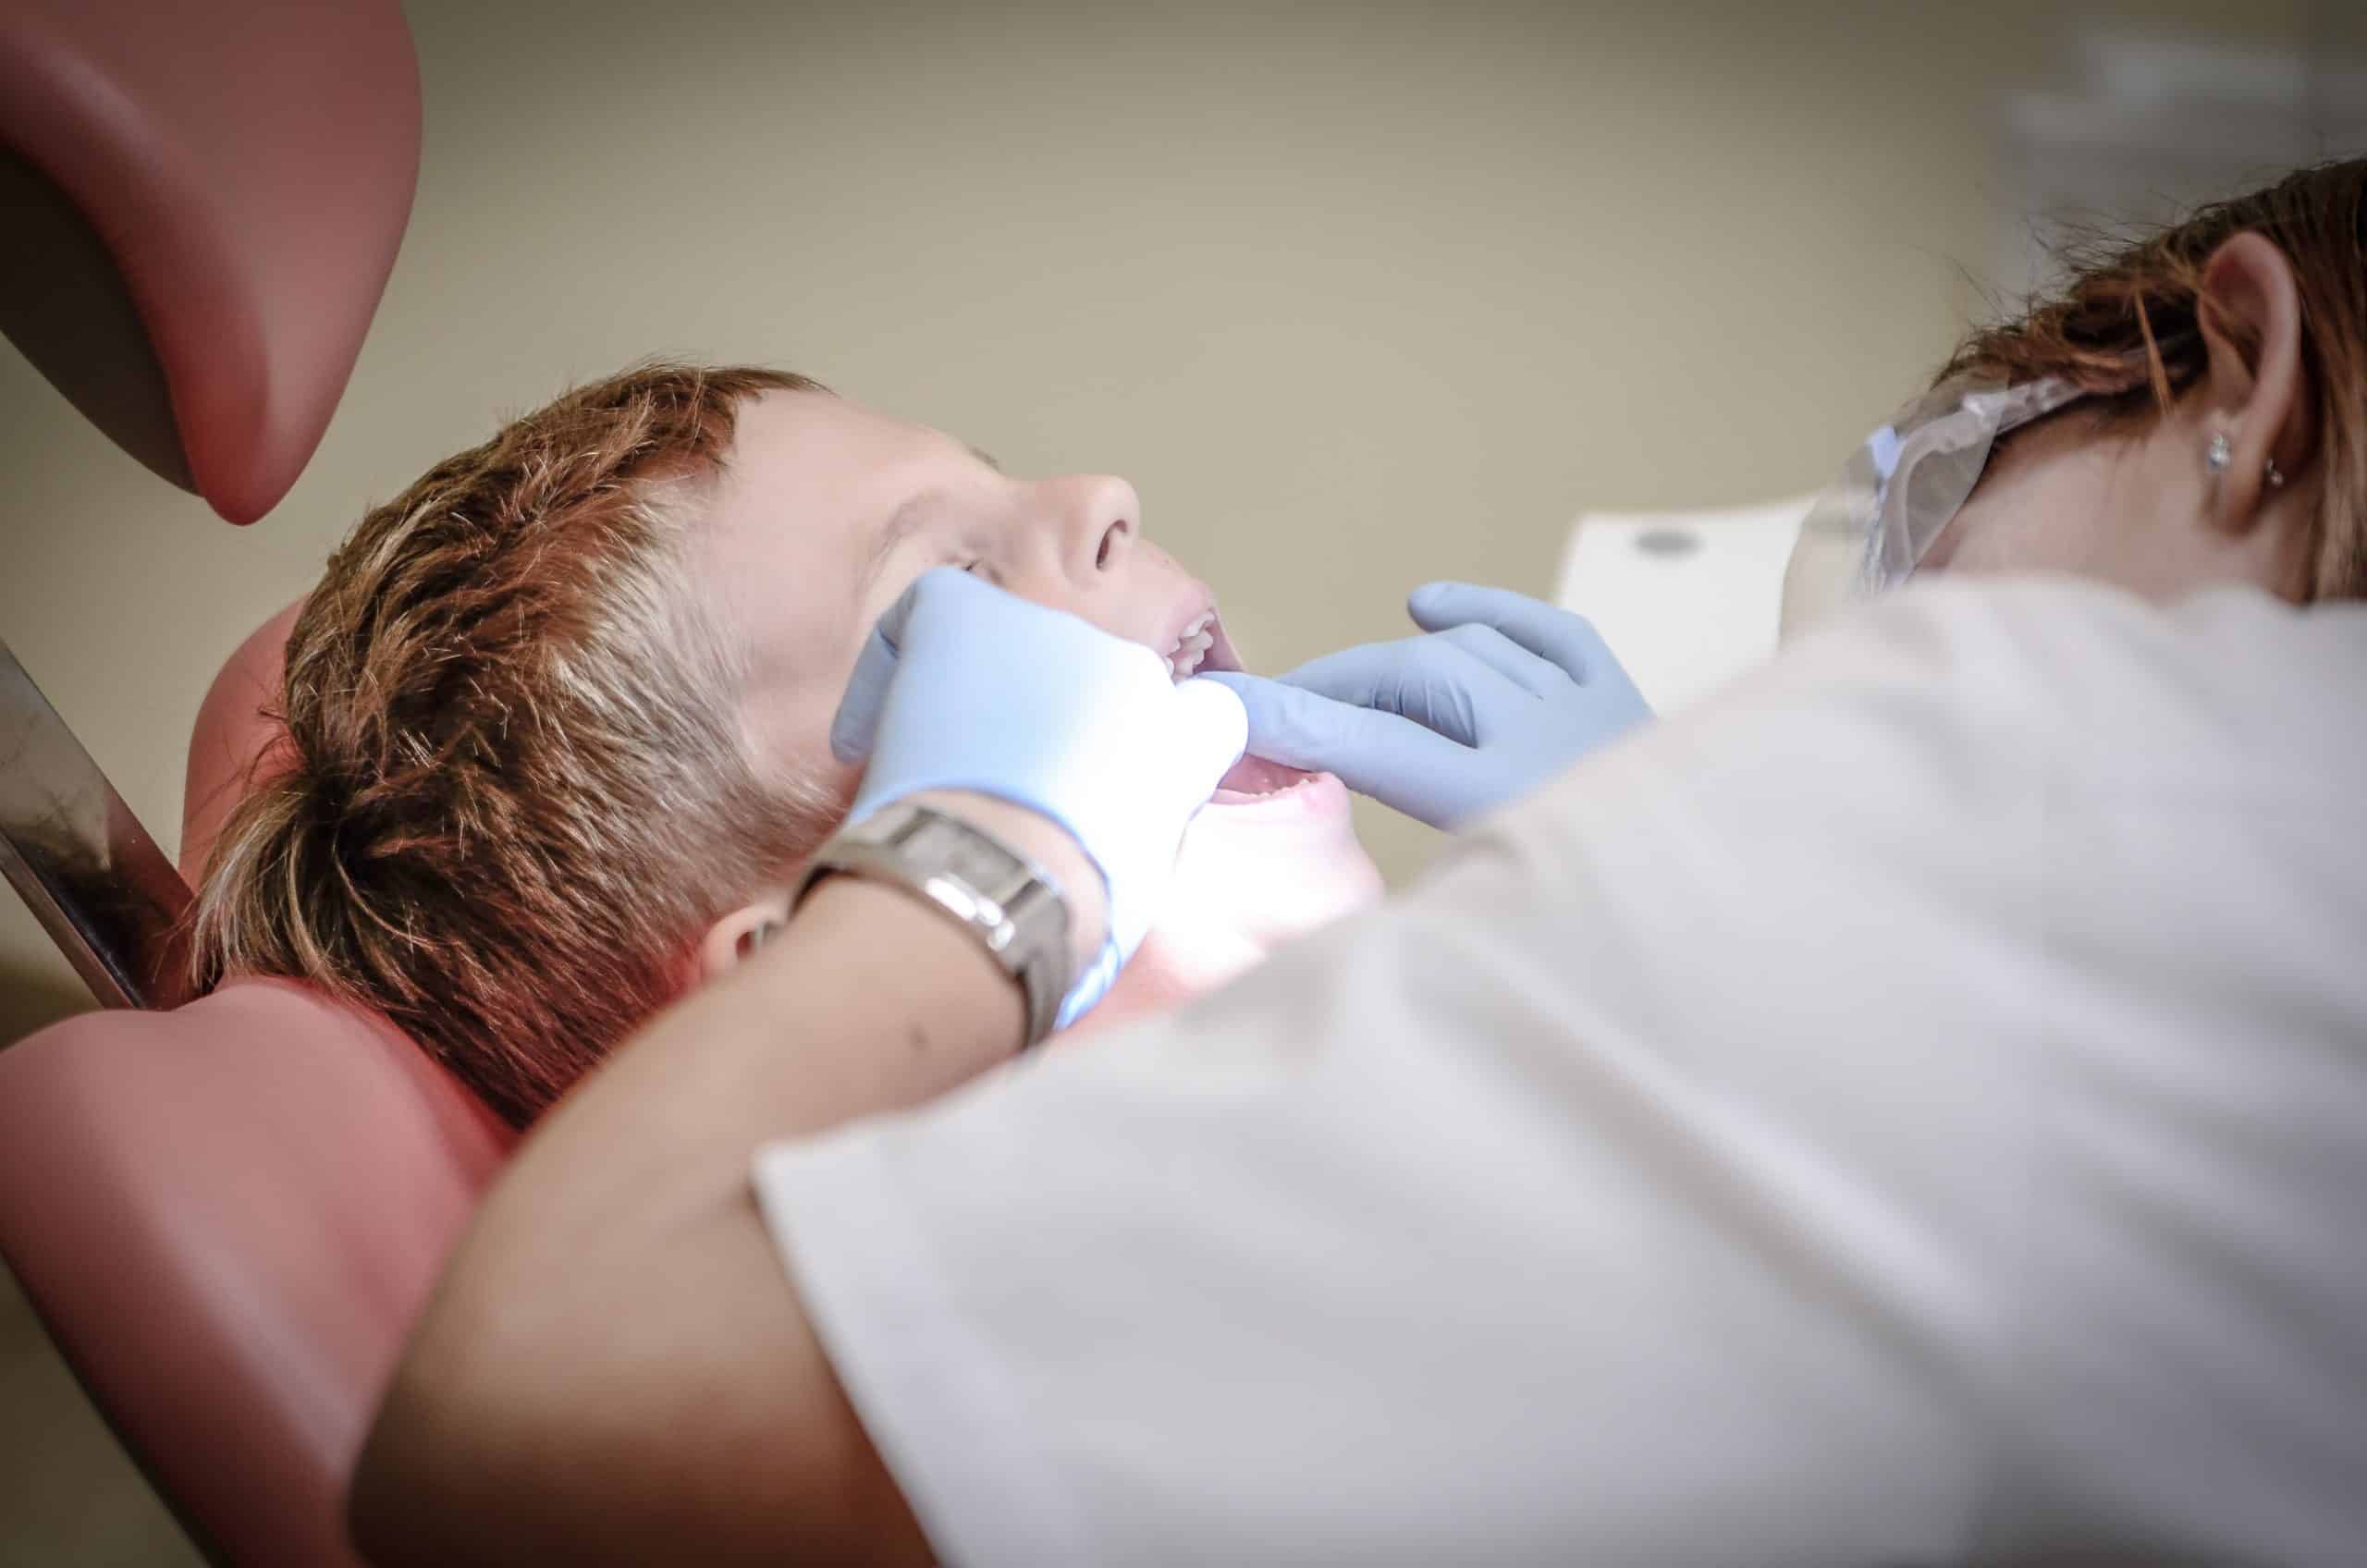 Does Cosmetic Dental Care Come Under Insurance? All Details Here